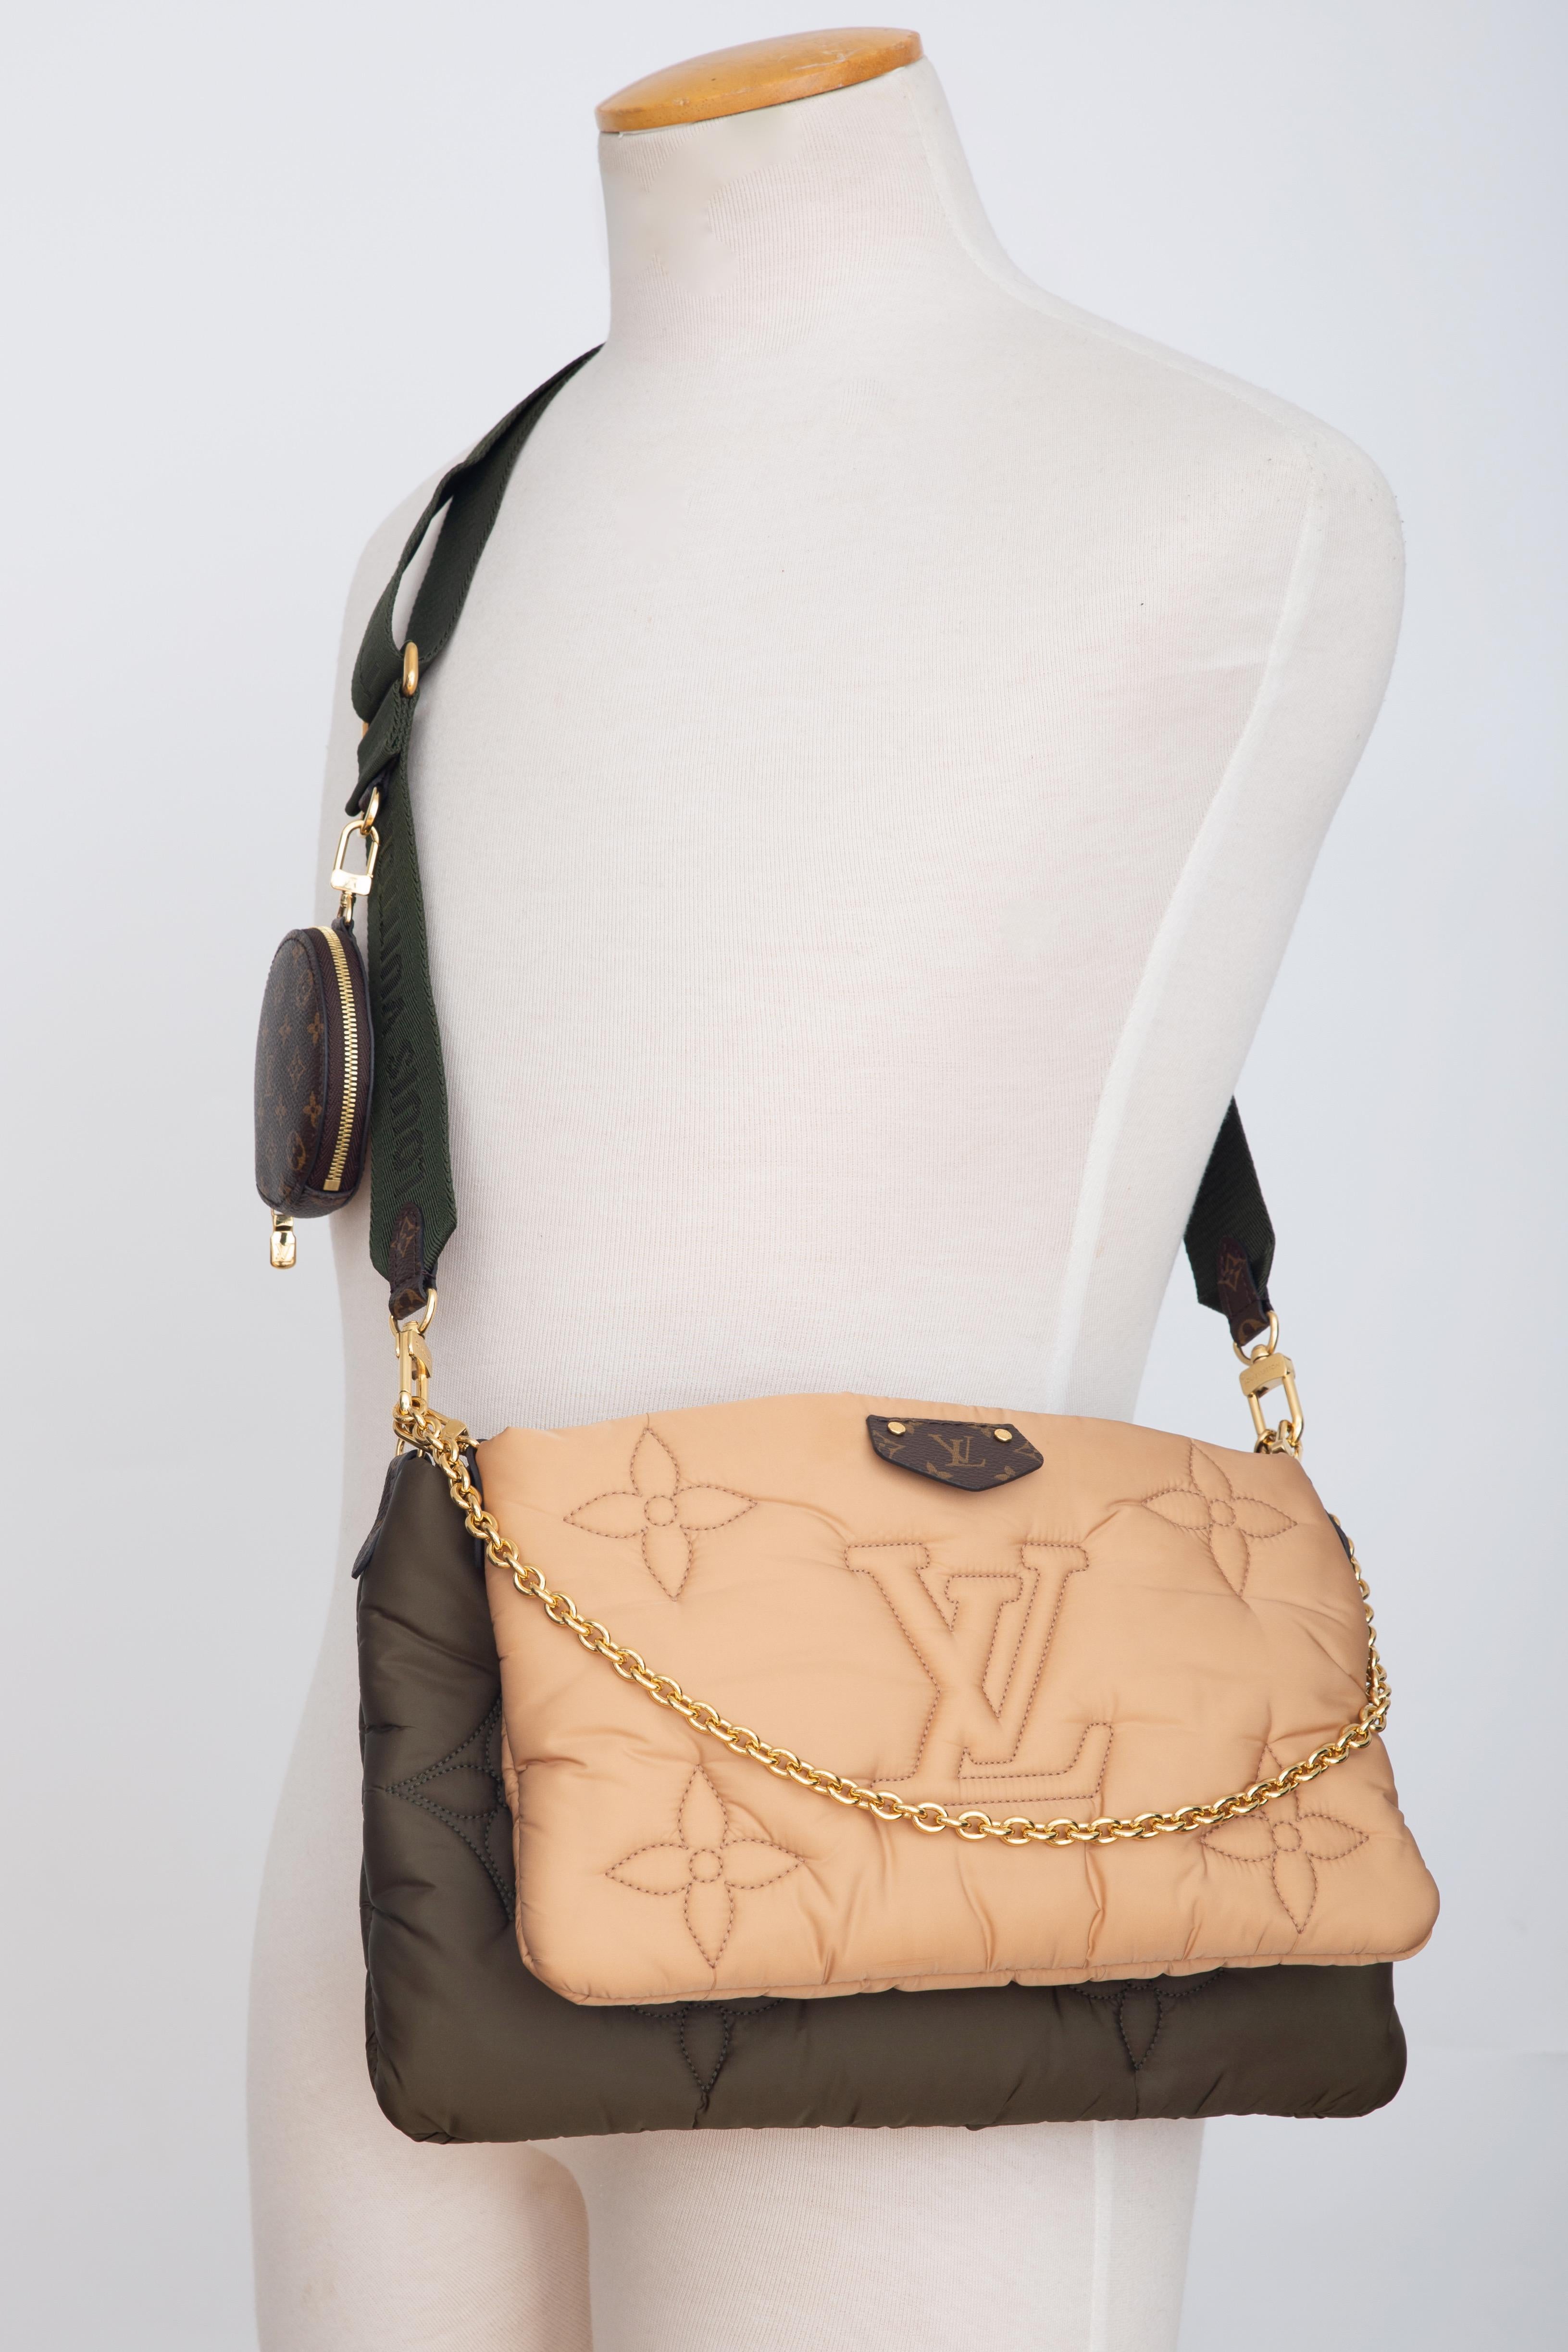 The hybrid maxi multi pochette accessoires handbag comes in eco-responsible econyl regenerated nylon. The exterior is embroidered with a monogram pattern, giving it a comfy padded aspect, and lined with mini-monogram printed econyl. this cross-body